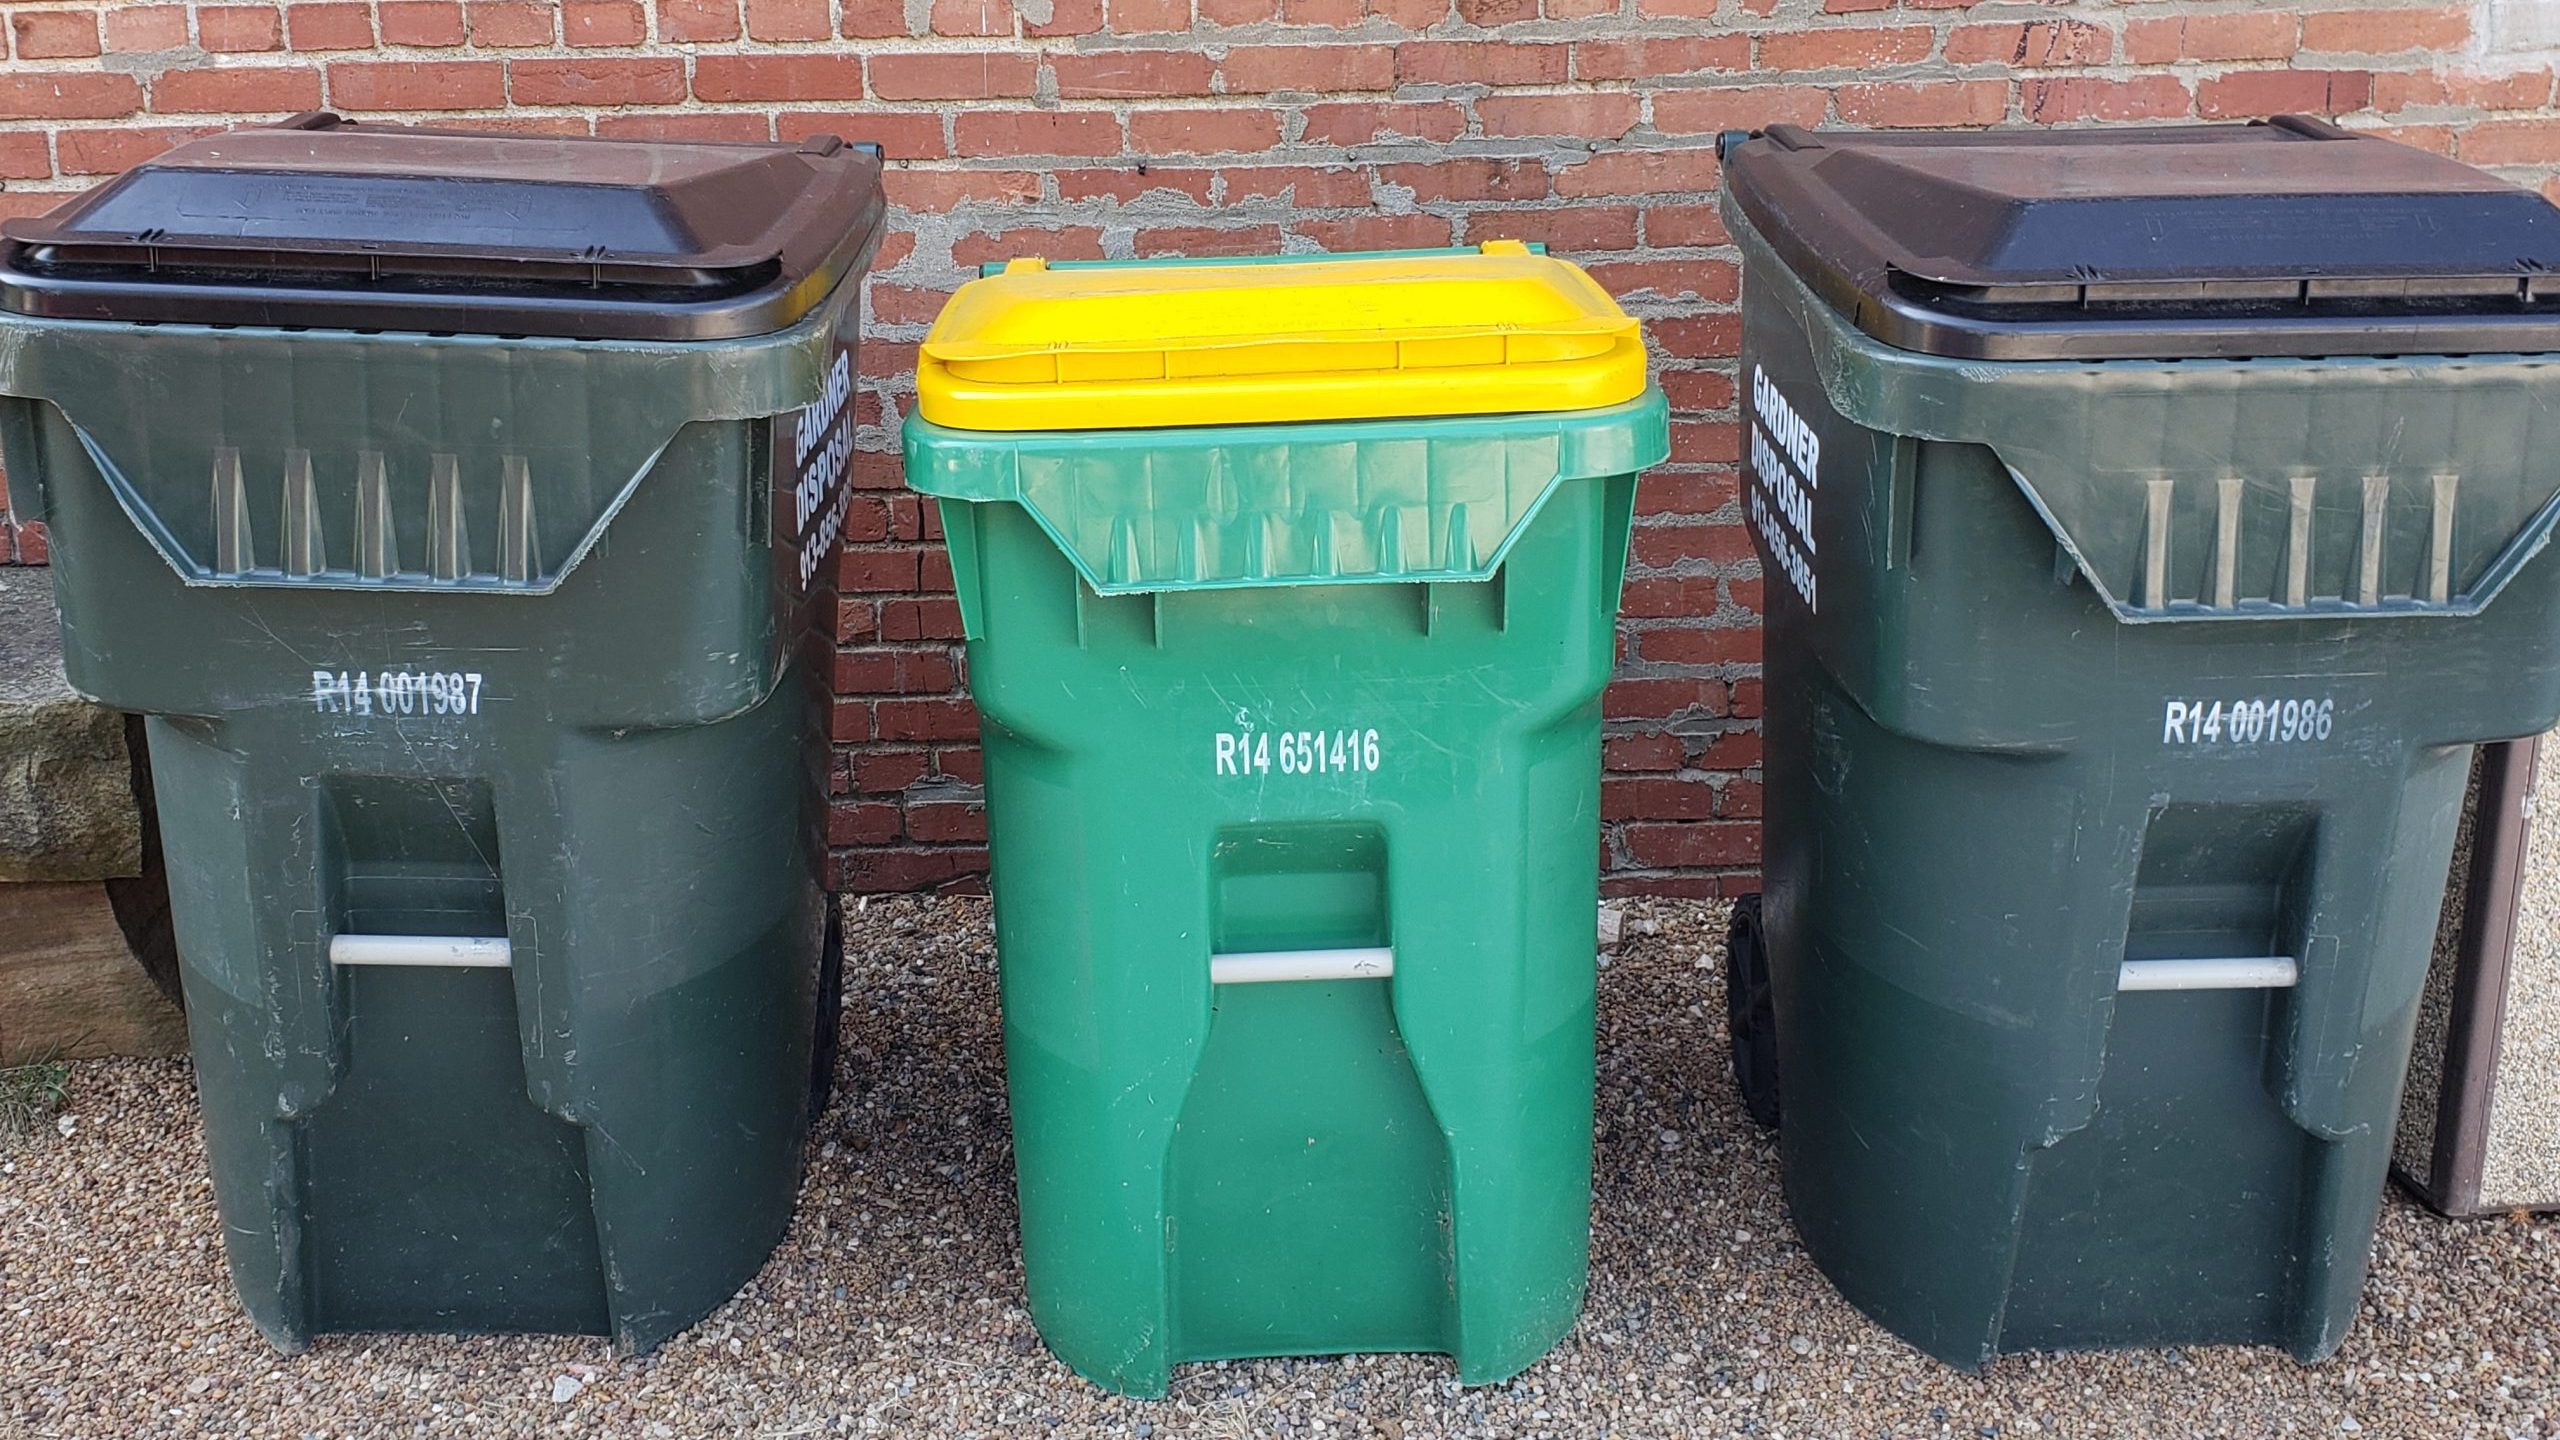 Two garbage cans and recycling bin